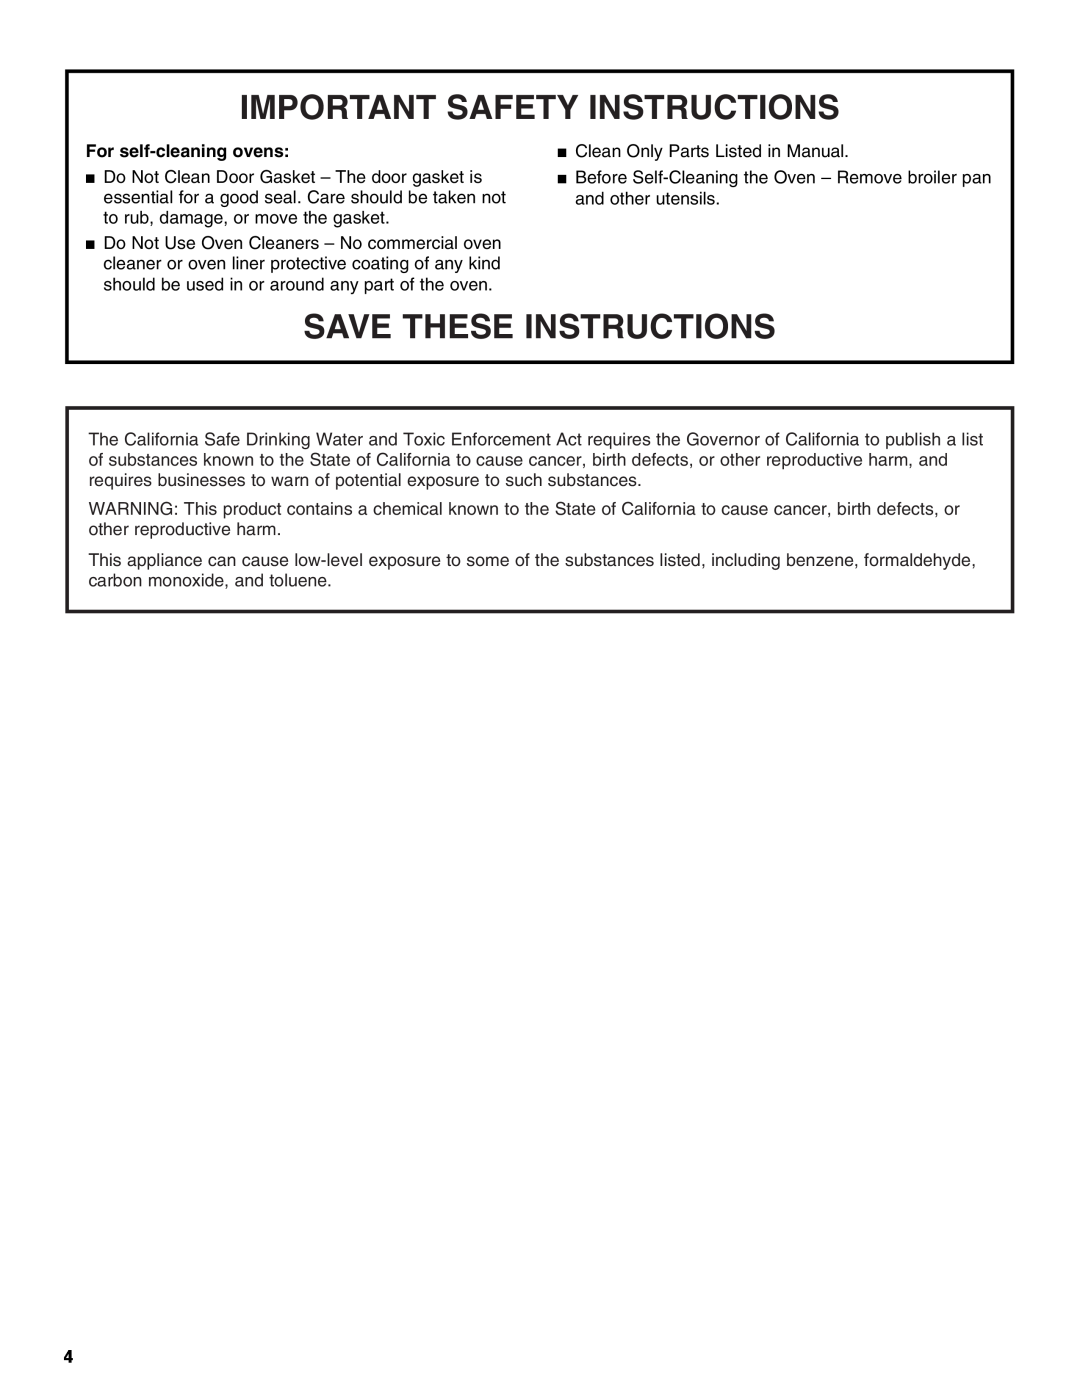 Whirlpool RBD276 manual For self-cleaning ovens, Important Safety Instructions, Save These Instructions 